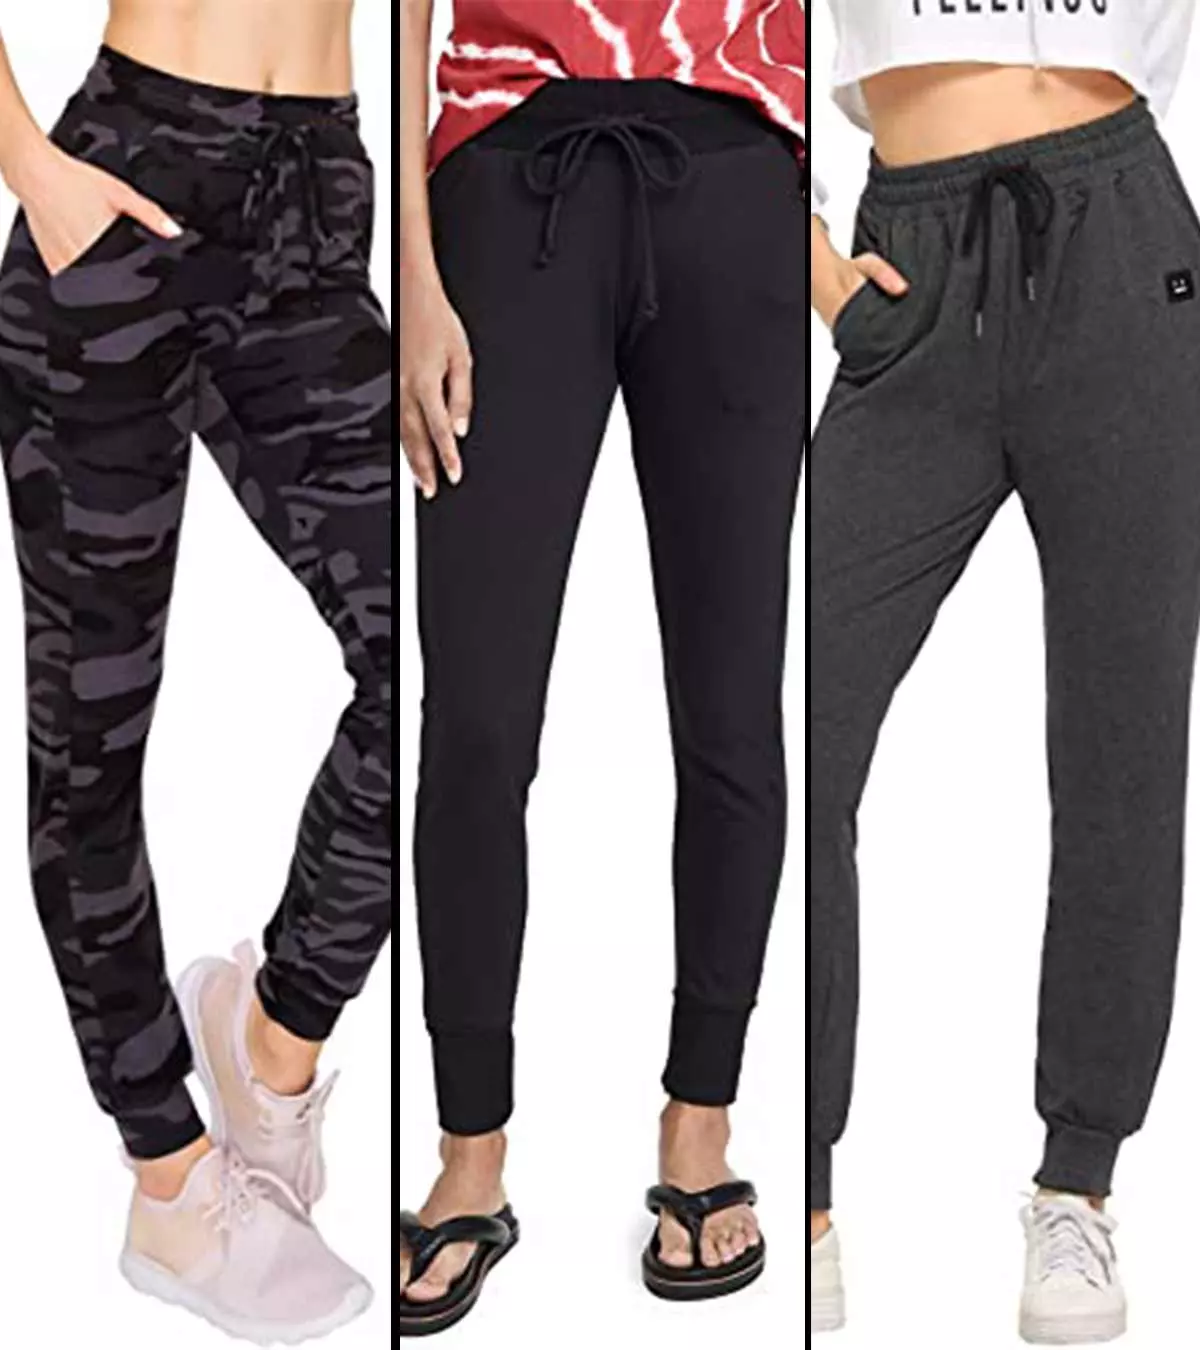 15 Best Sweatpants For Women To Wear At Home, Fashion Designer-Approved